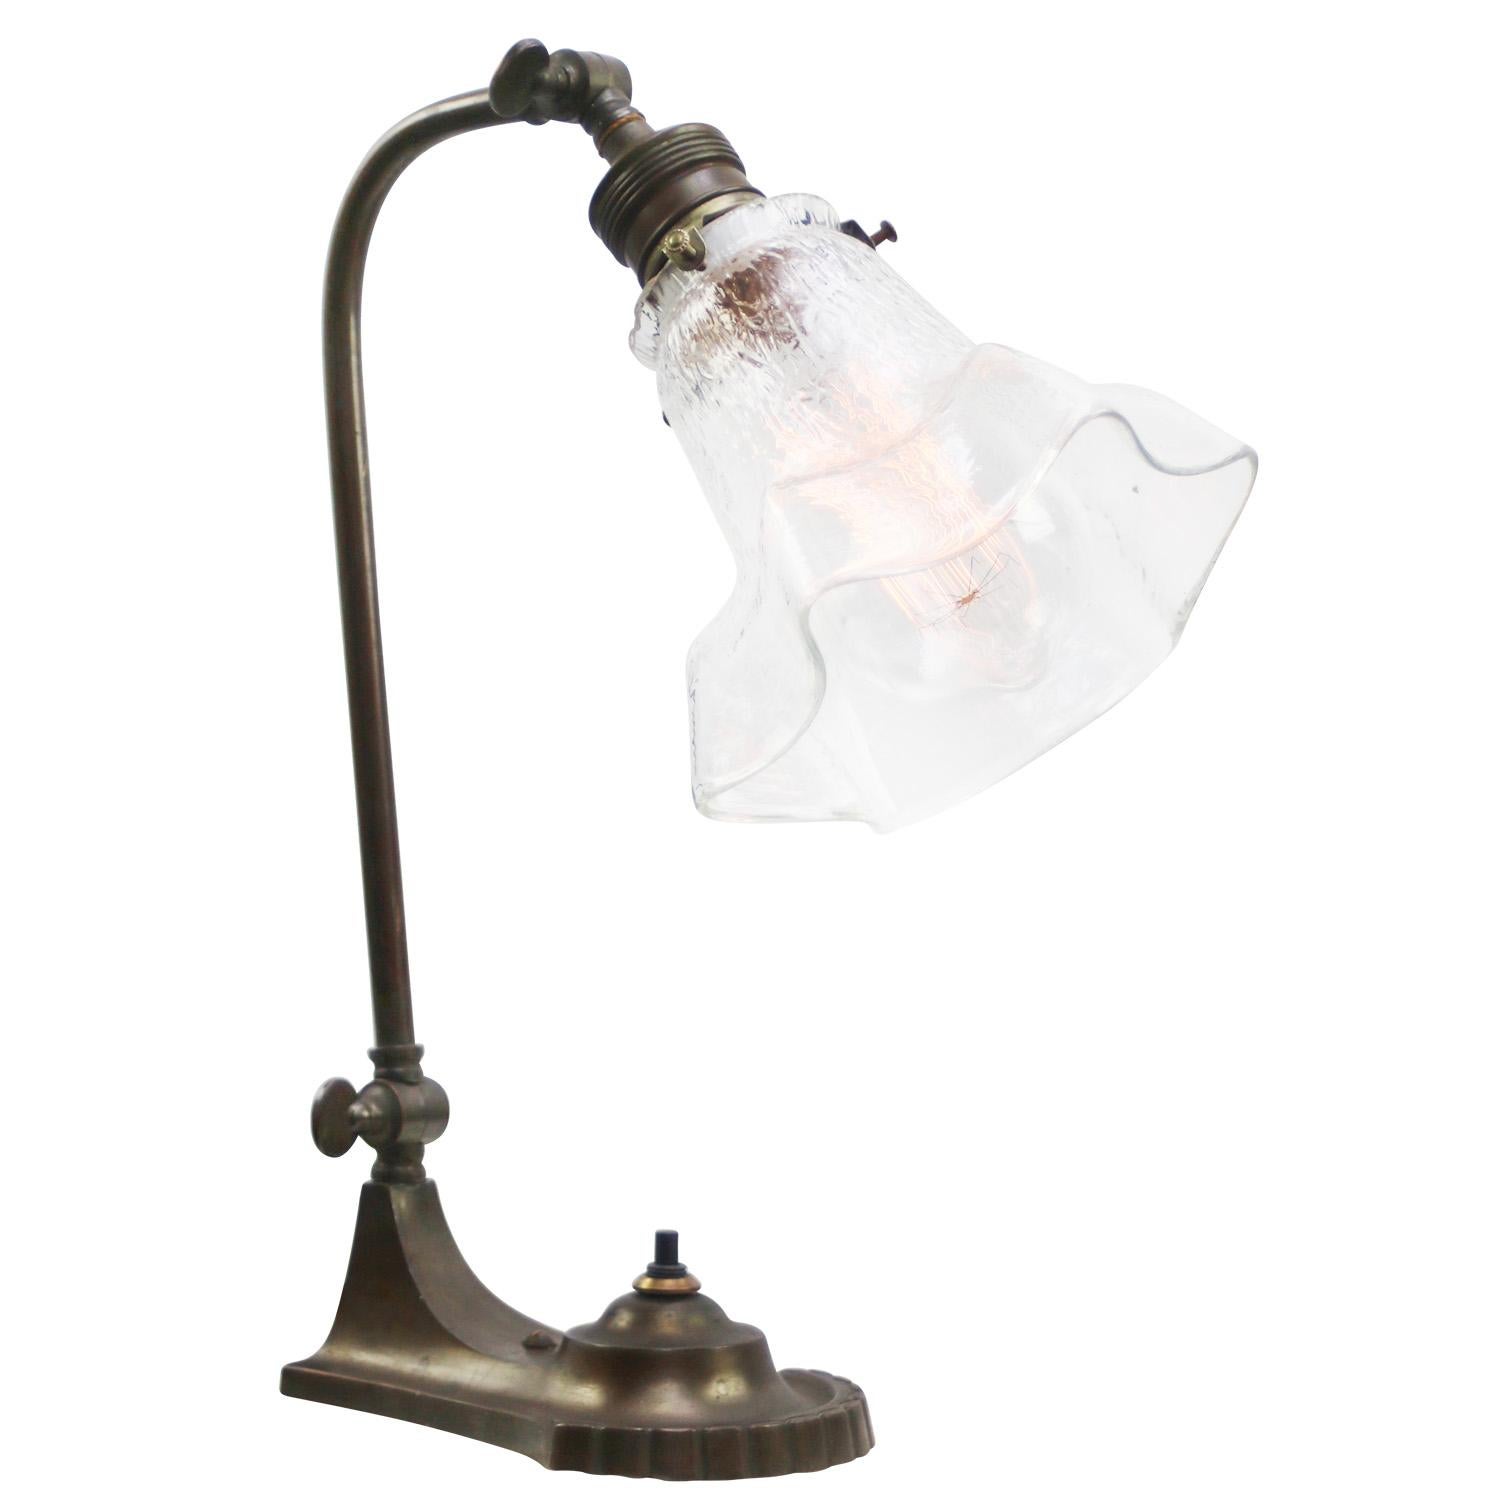 French 1930s, Art deco, frosted glass, cast desk light / table lamp
2,5 meter black cotton wire, plug and switch

Also, available with US/UK plug

Priced per individual item. All lamps have been made suitable by international standards for